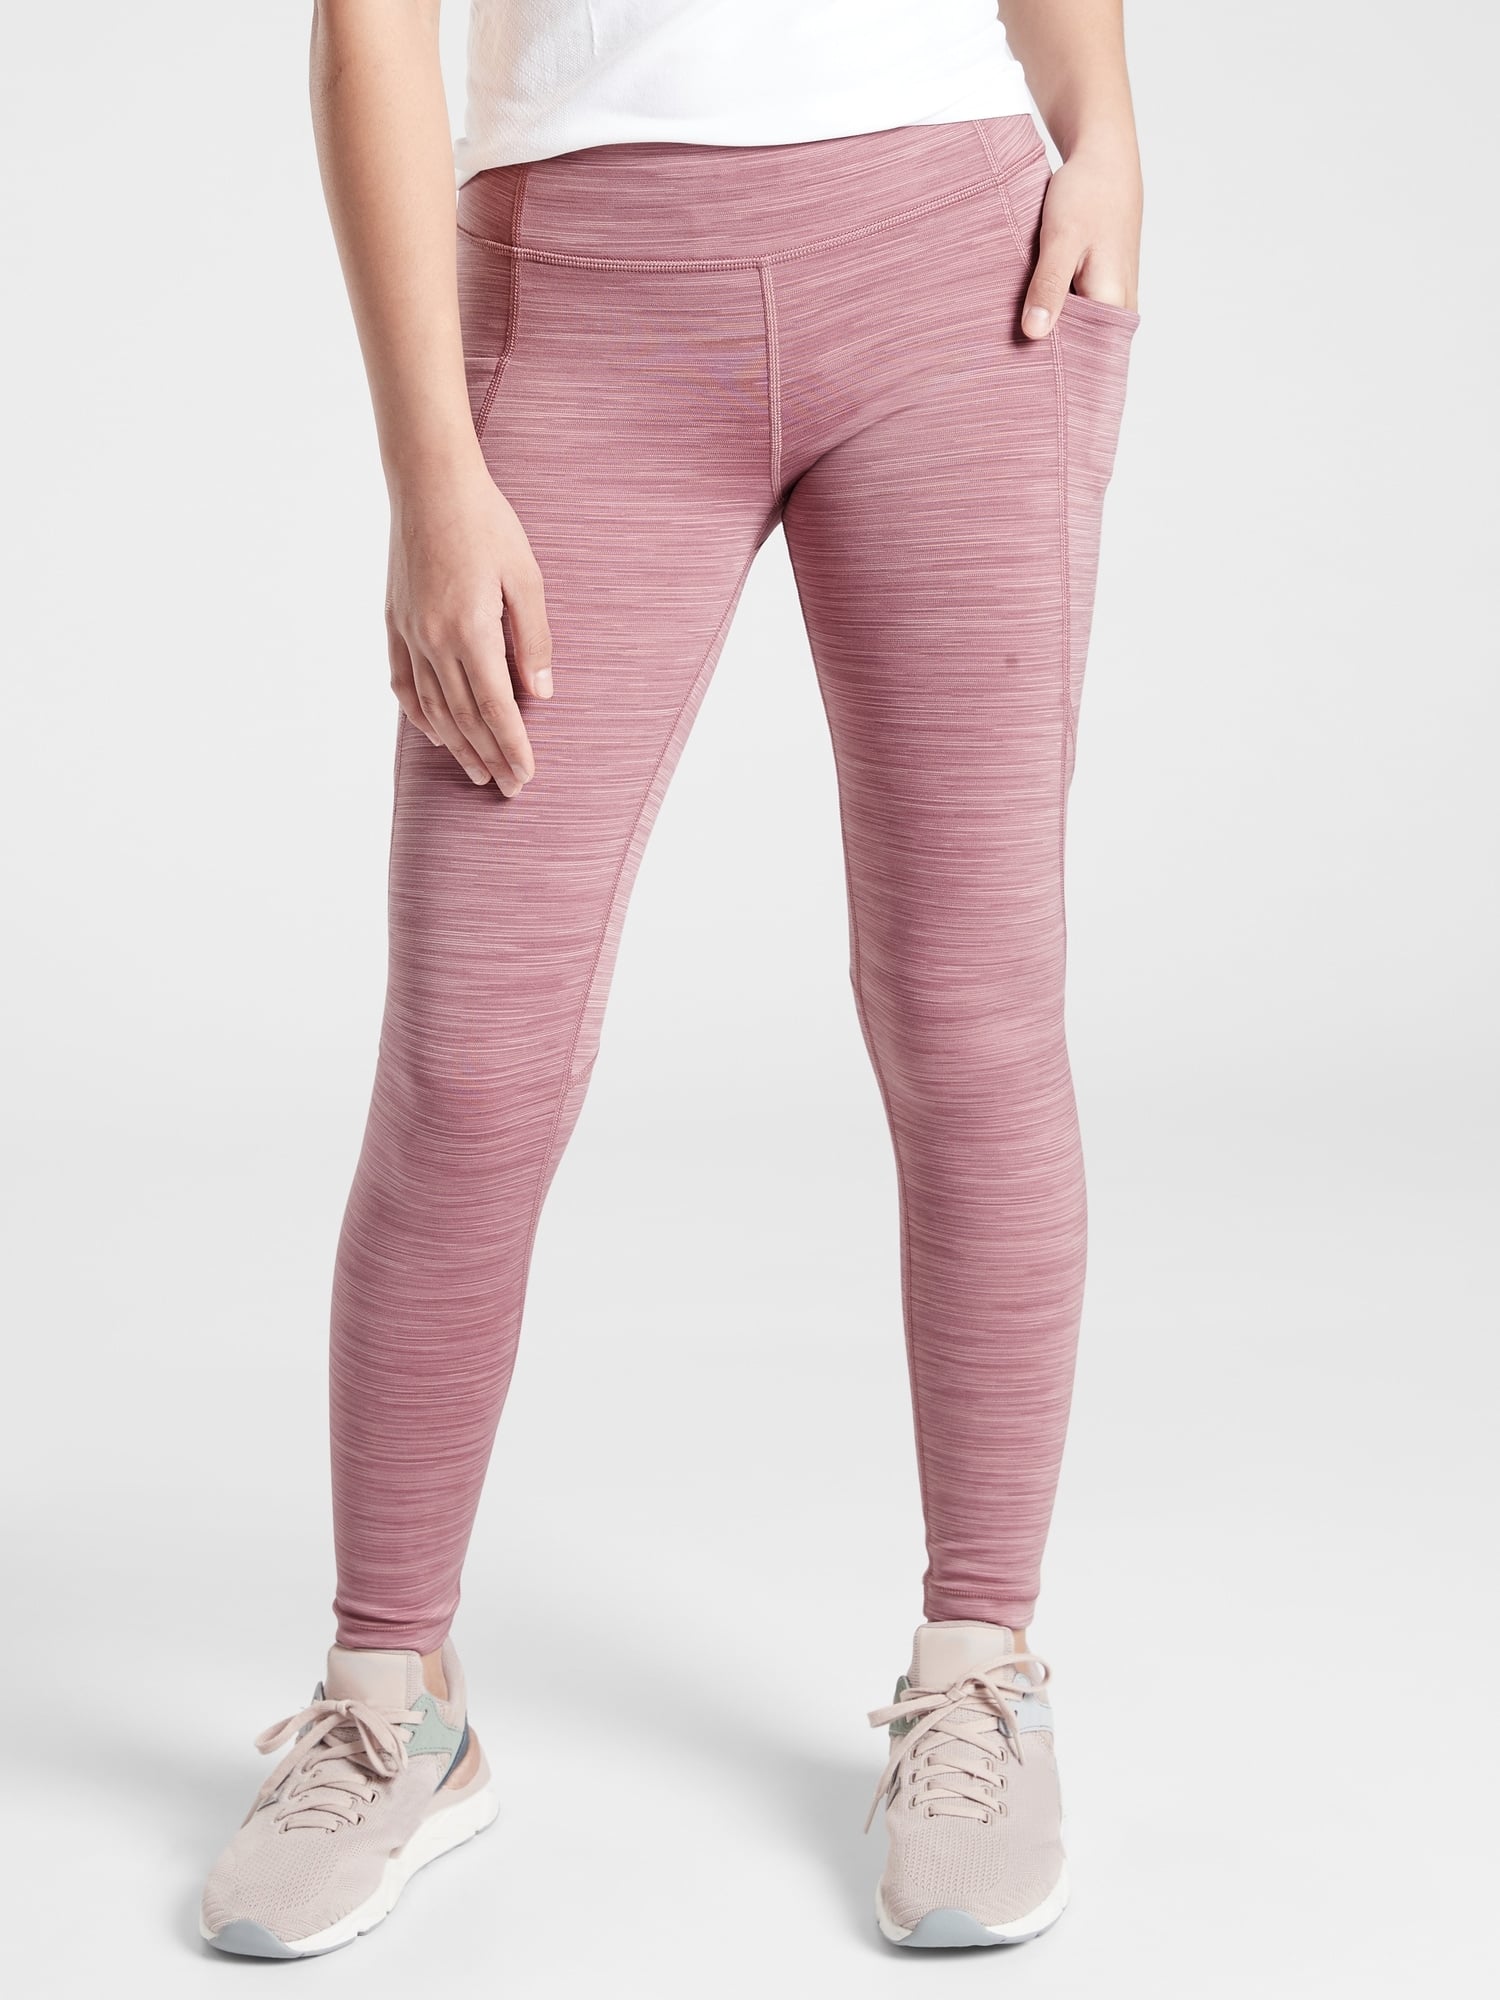 Athleta Girl Stash Your Treasures Spacedye Tight, Gym Class Hero! This  Brand Has the Best Mother-Daughter Fitness Sets